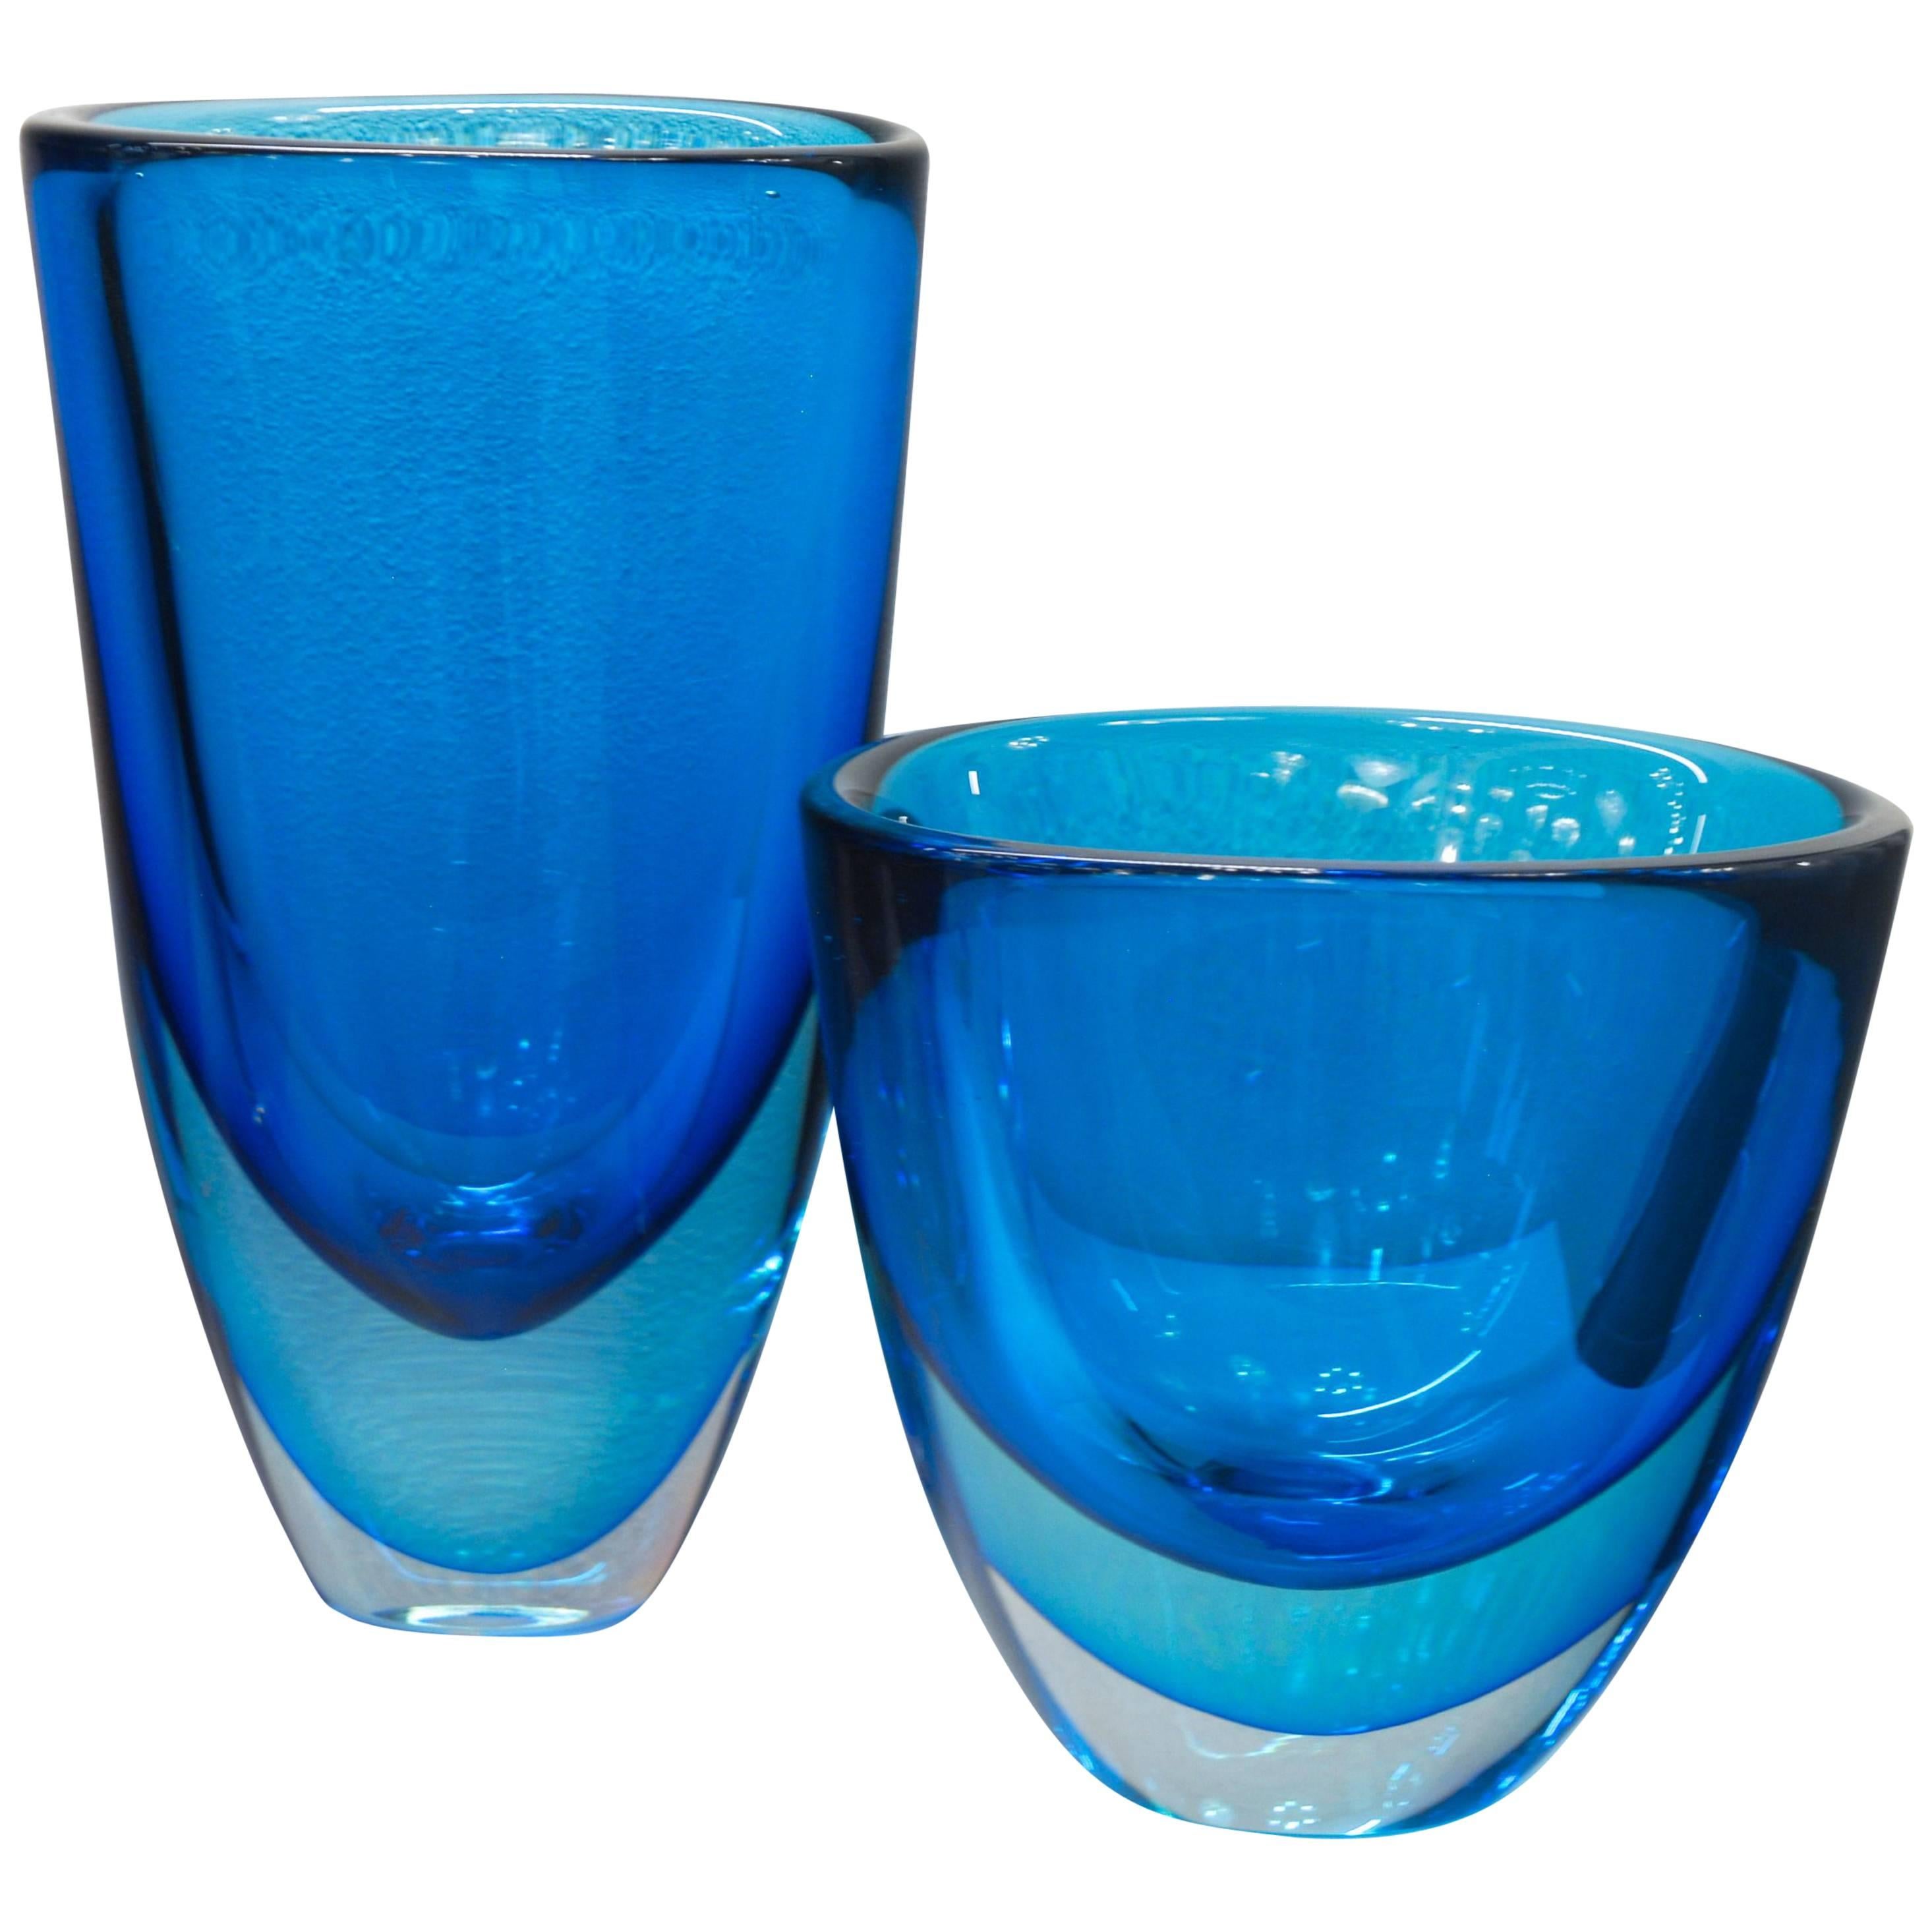 Stefano Toso Pair of Sommerso Acquamare and Cobalt Vases, Massiccio with Sbruffi